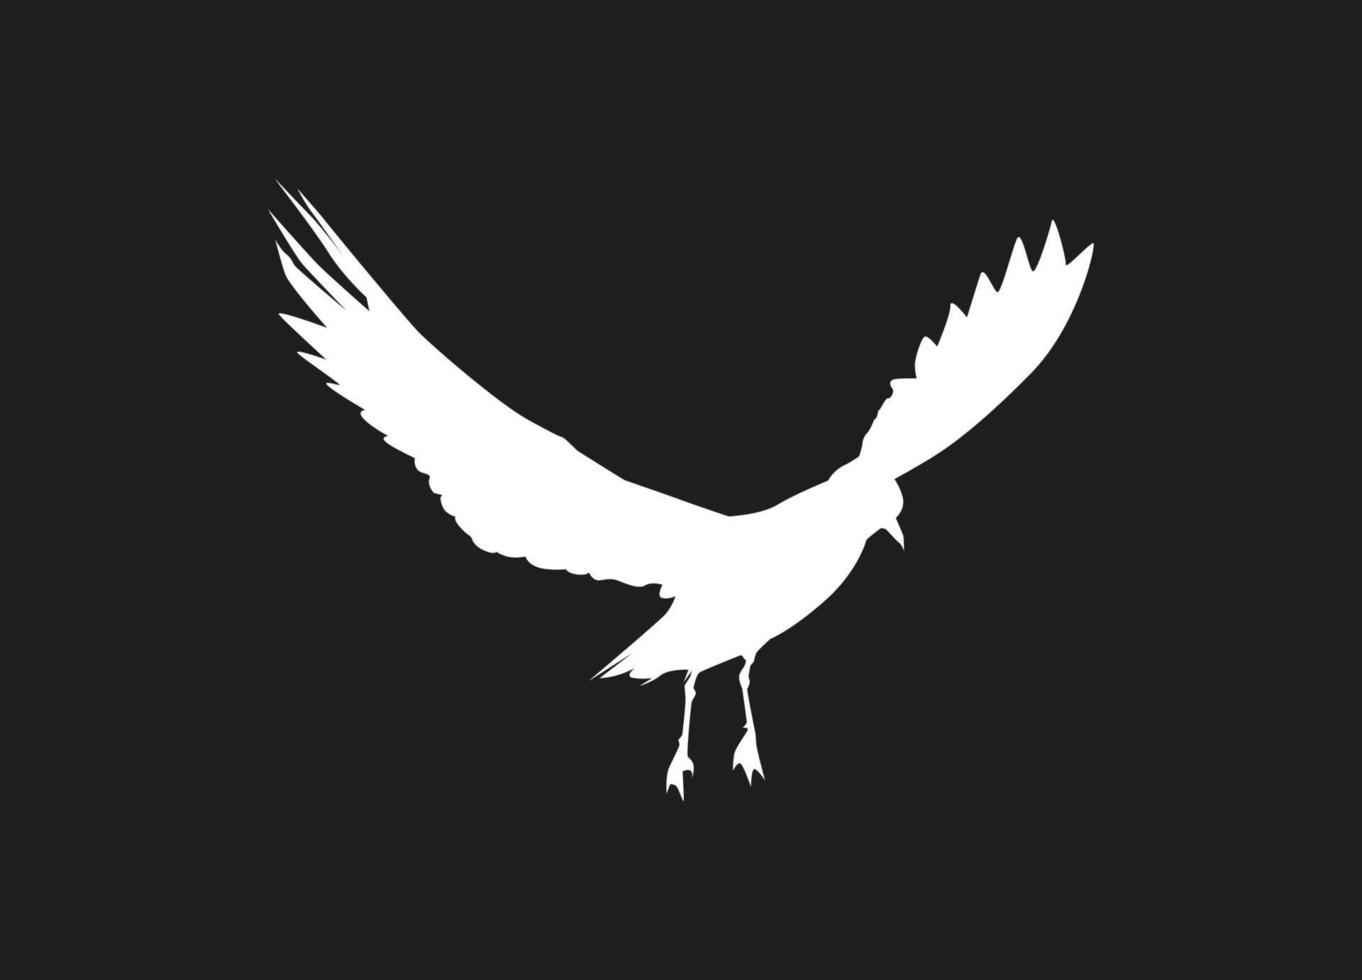 Flying bird of white silhouettes isolated on black background. Fit for logo, symbol, banner, bakcground, tattoo, apparel. Bird element vector. Eps 10 vector